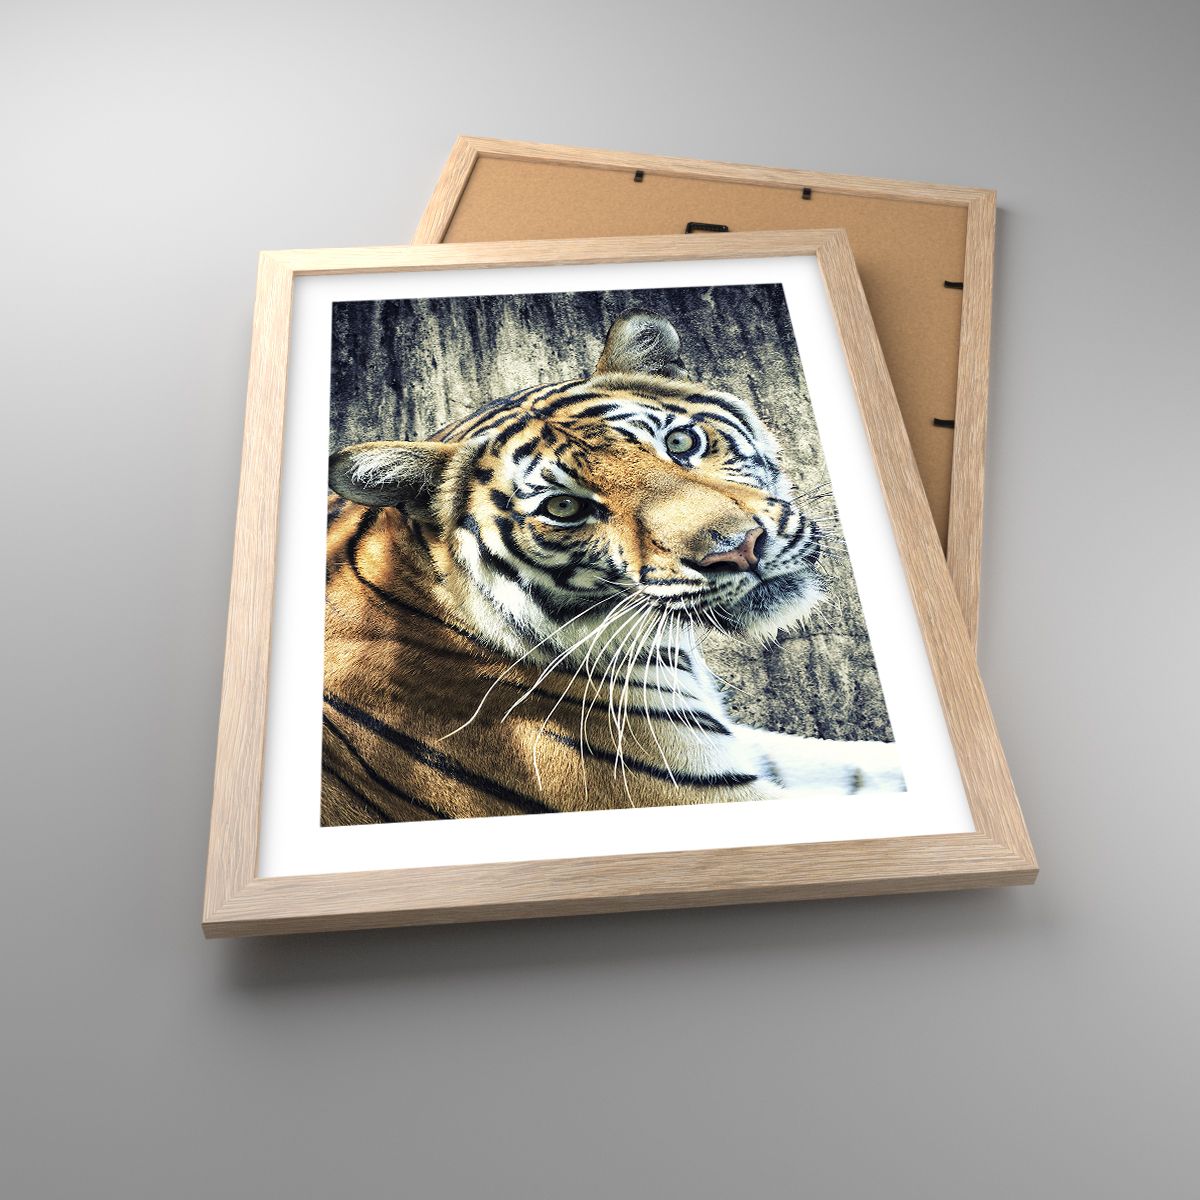 Poster Tiere, Poster Tiger, Poster Afrika, Poster Wildes Tier, Poster Indien